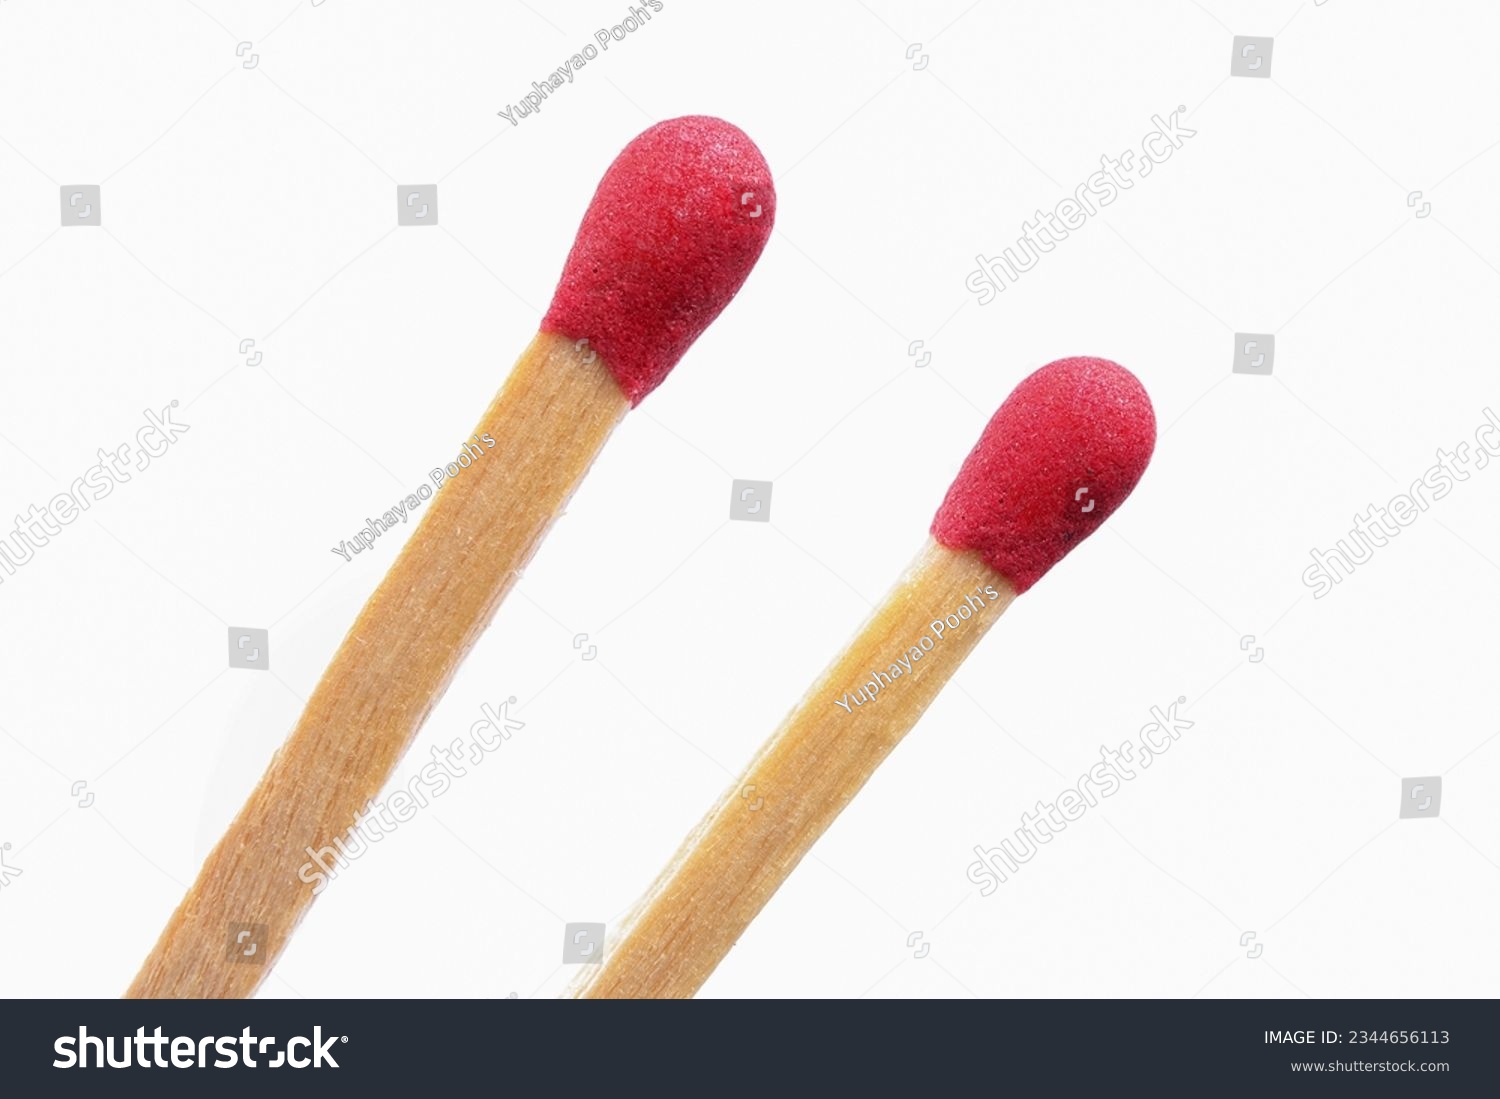 Close up of new matchsticks isolated on white background. match on white background #2344656113